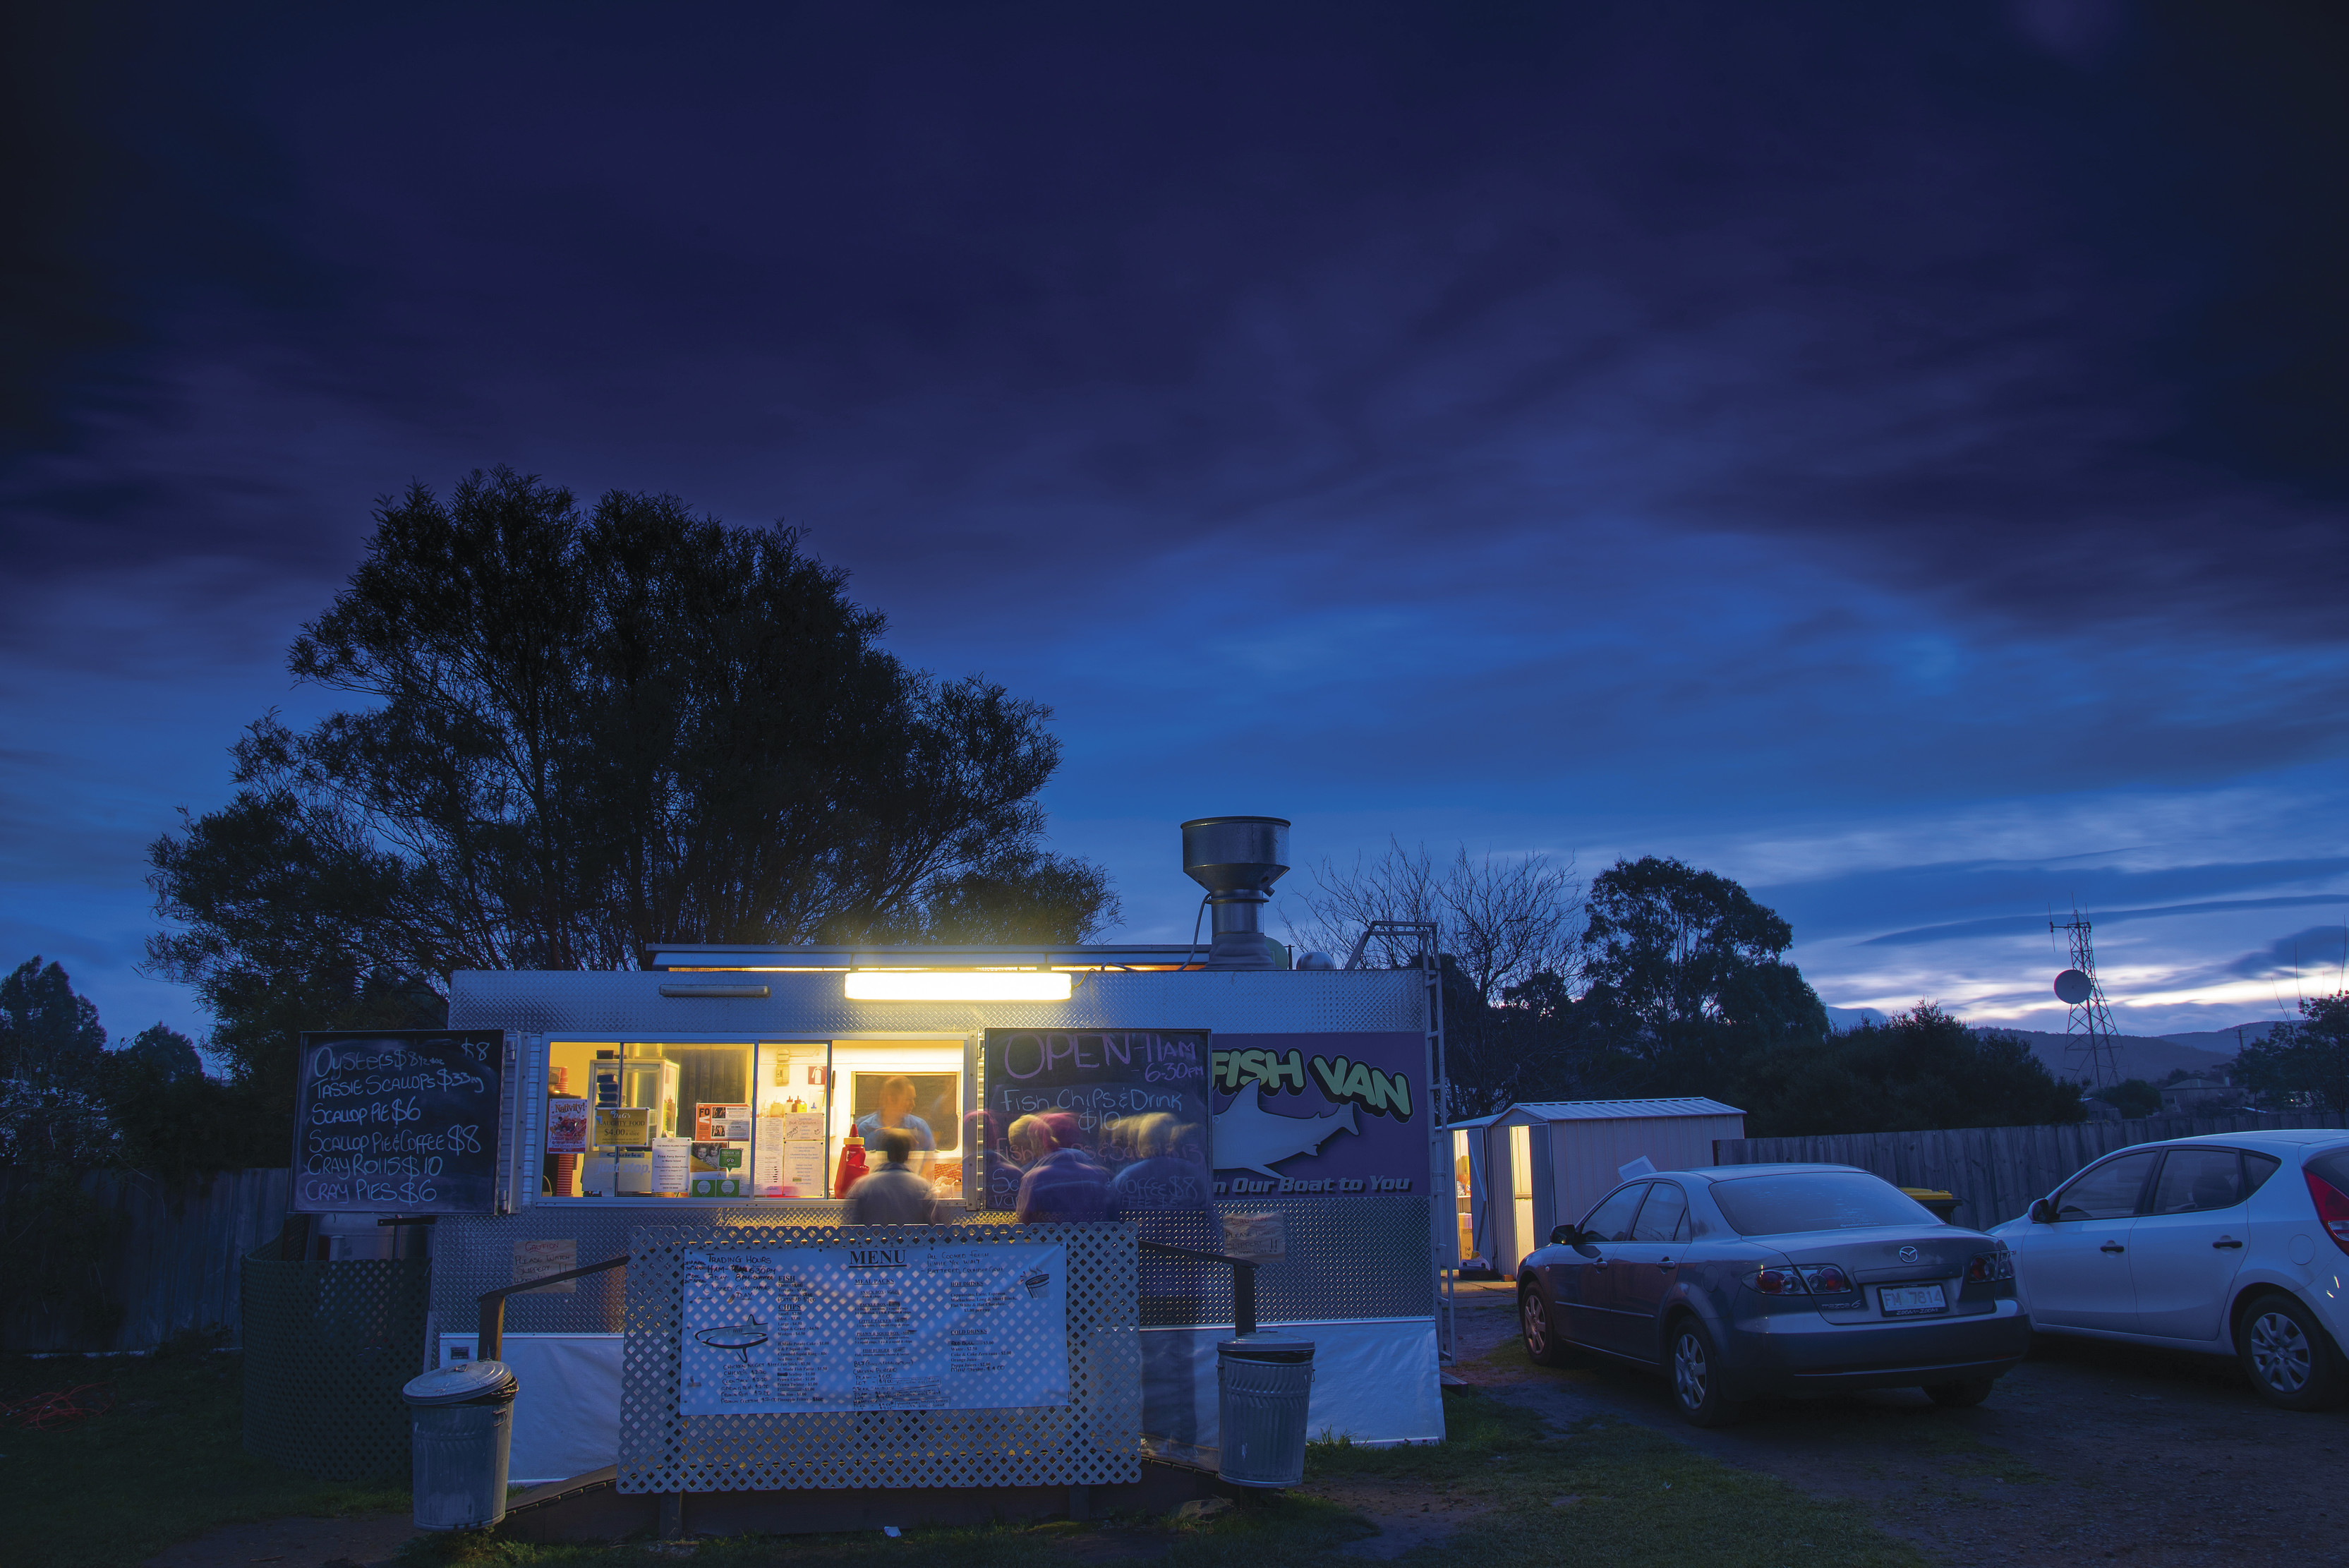 People queing at The Fish Van, Triabunna, with dark blue evening skies.